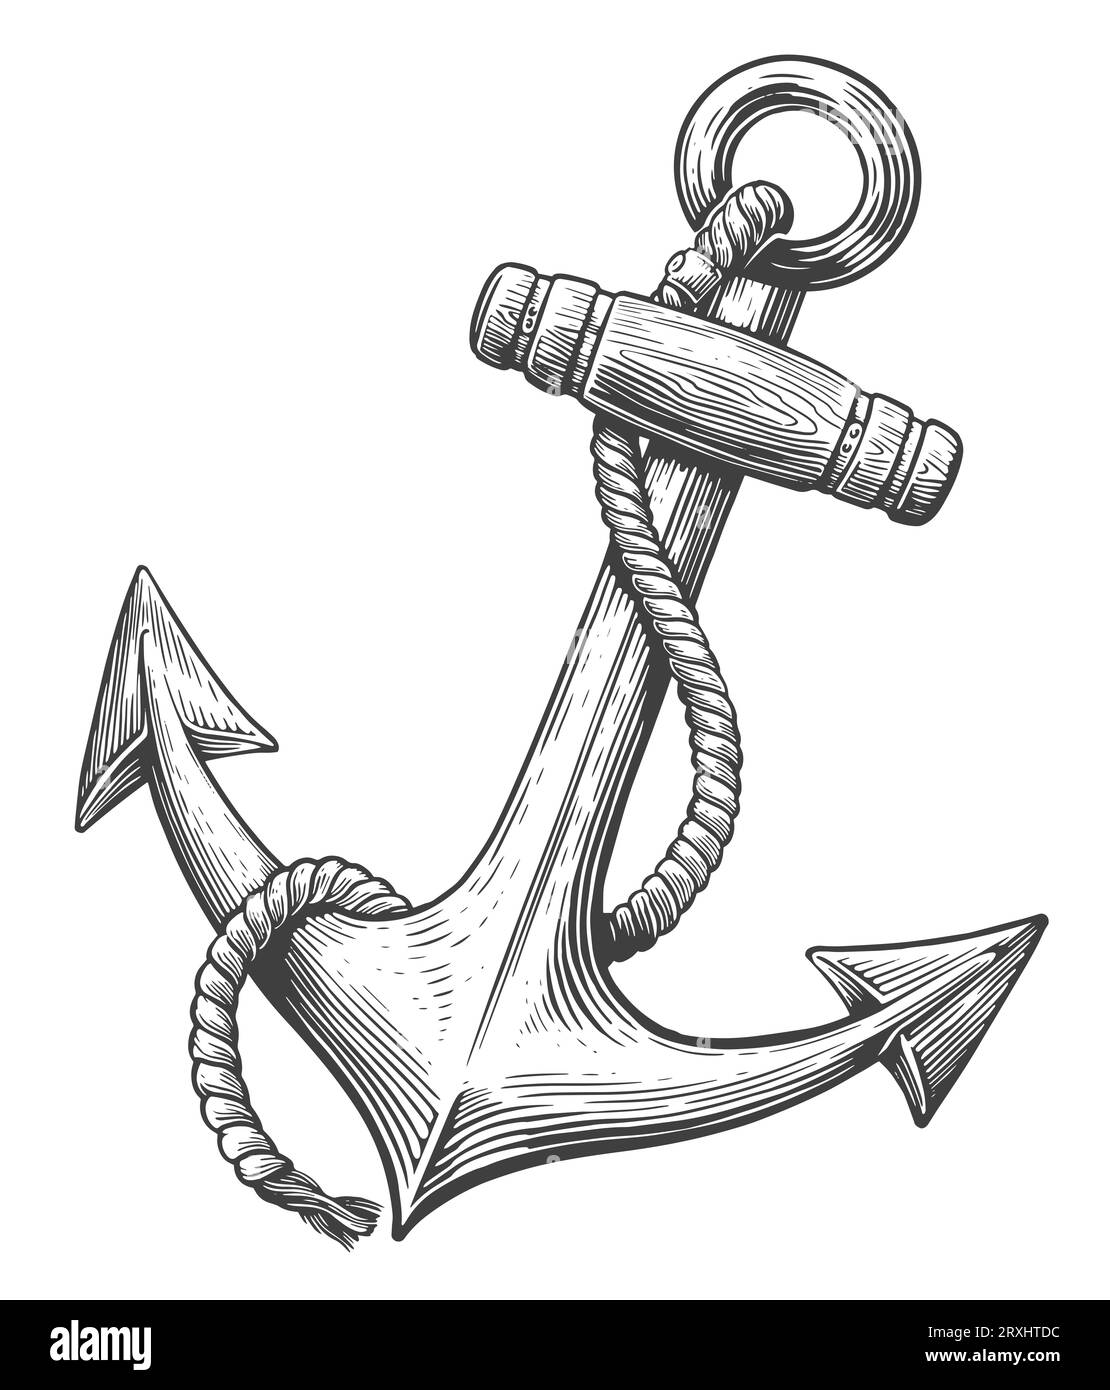 Ship anchor with rope. Sketch vintage illustration in engraving style Stock Photo